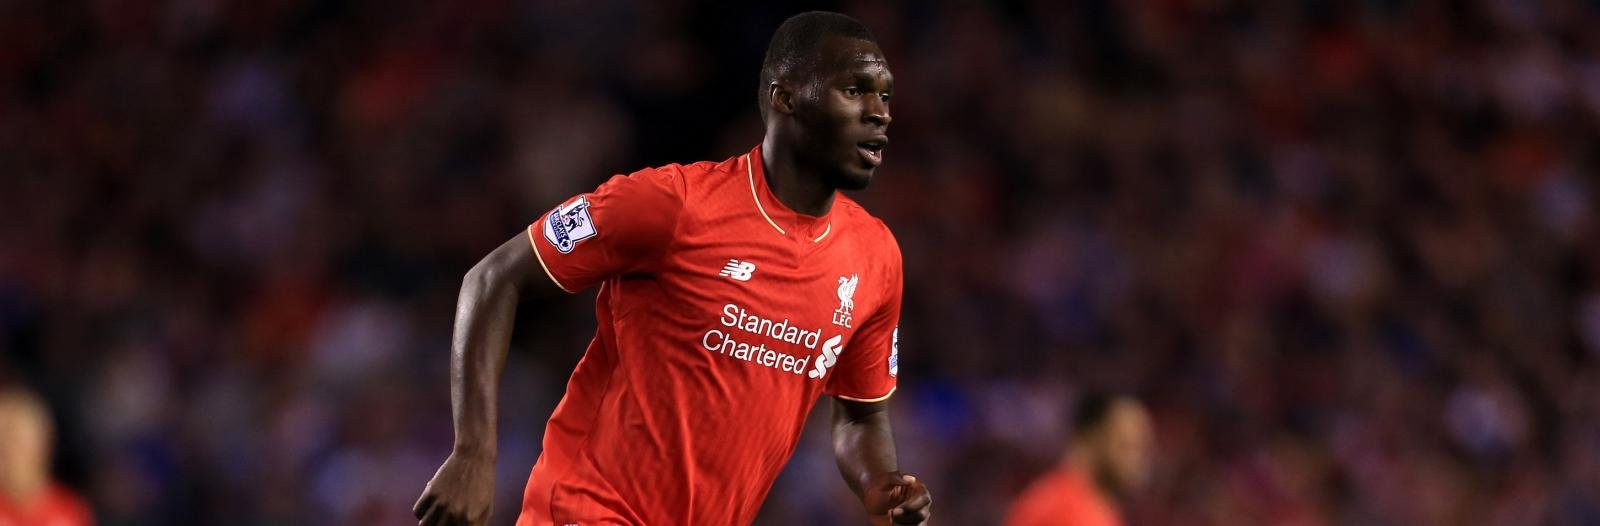 West Ham linked with £20m move for Benteke? No thanks!